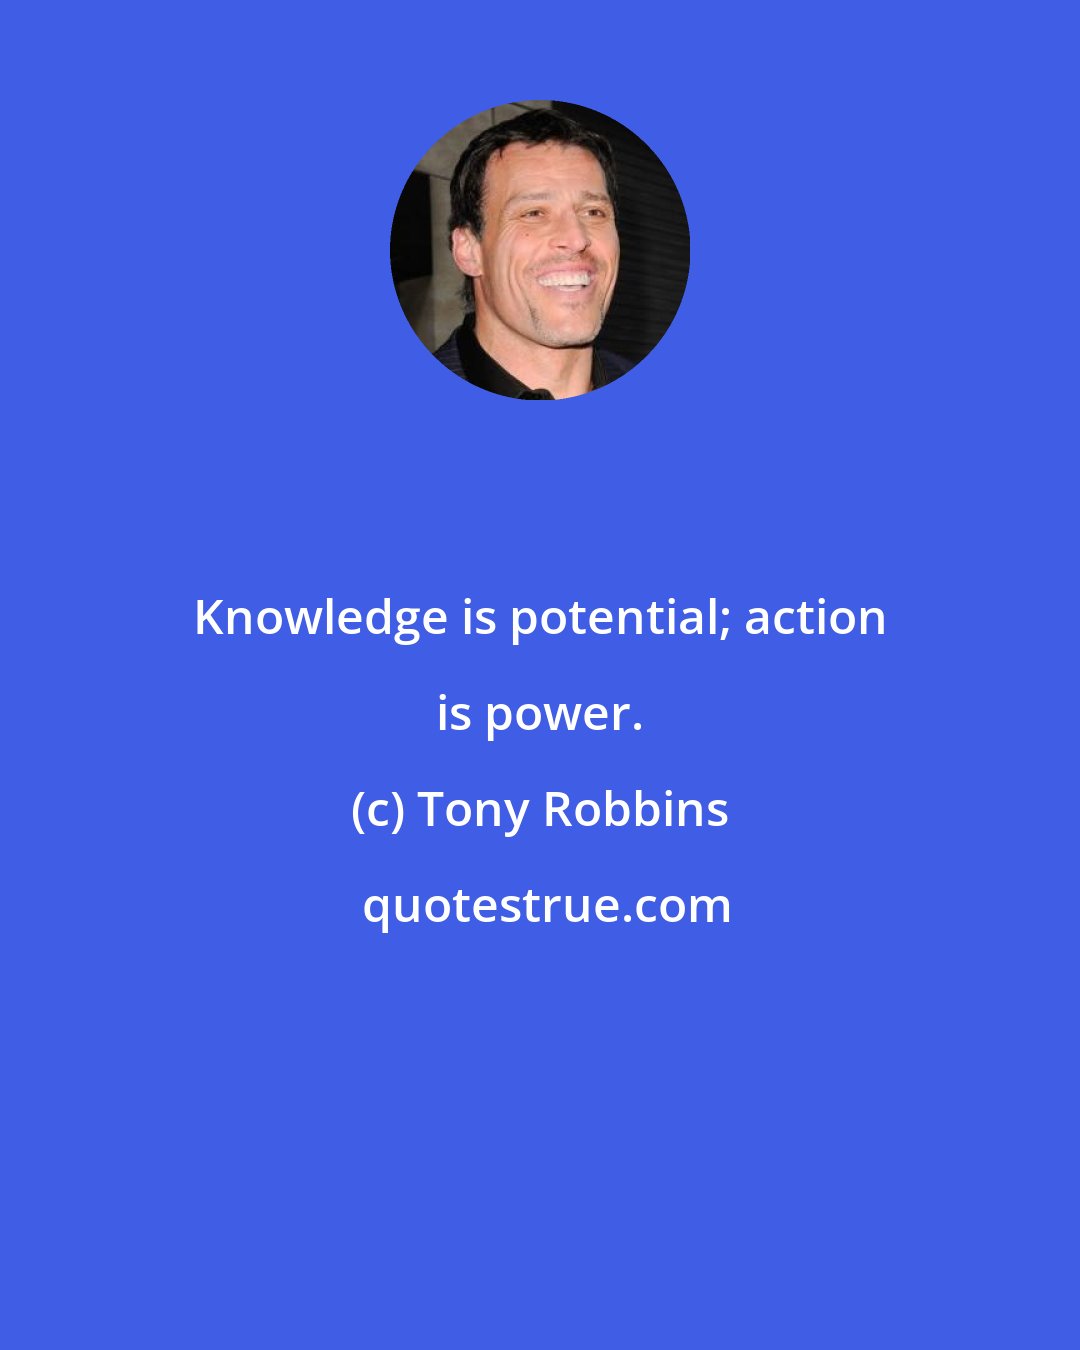 Tony Robbins: Knowledge is potential; action is power.